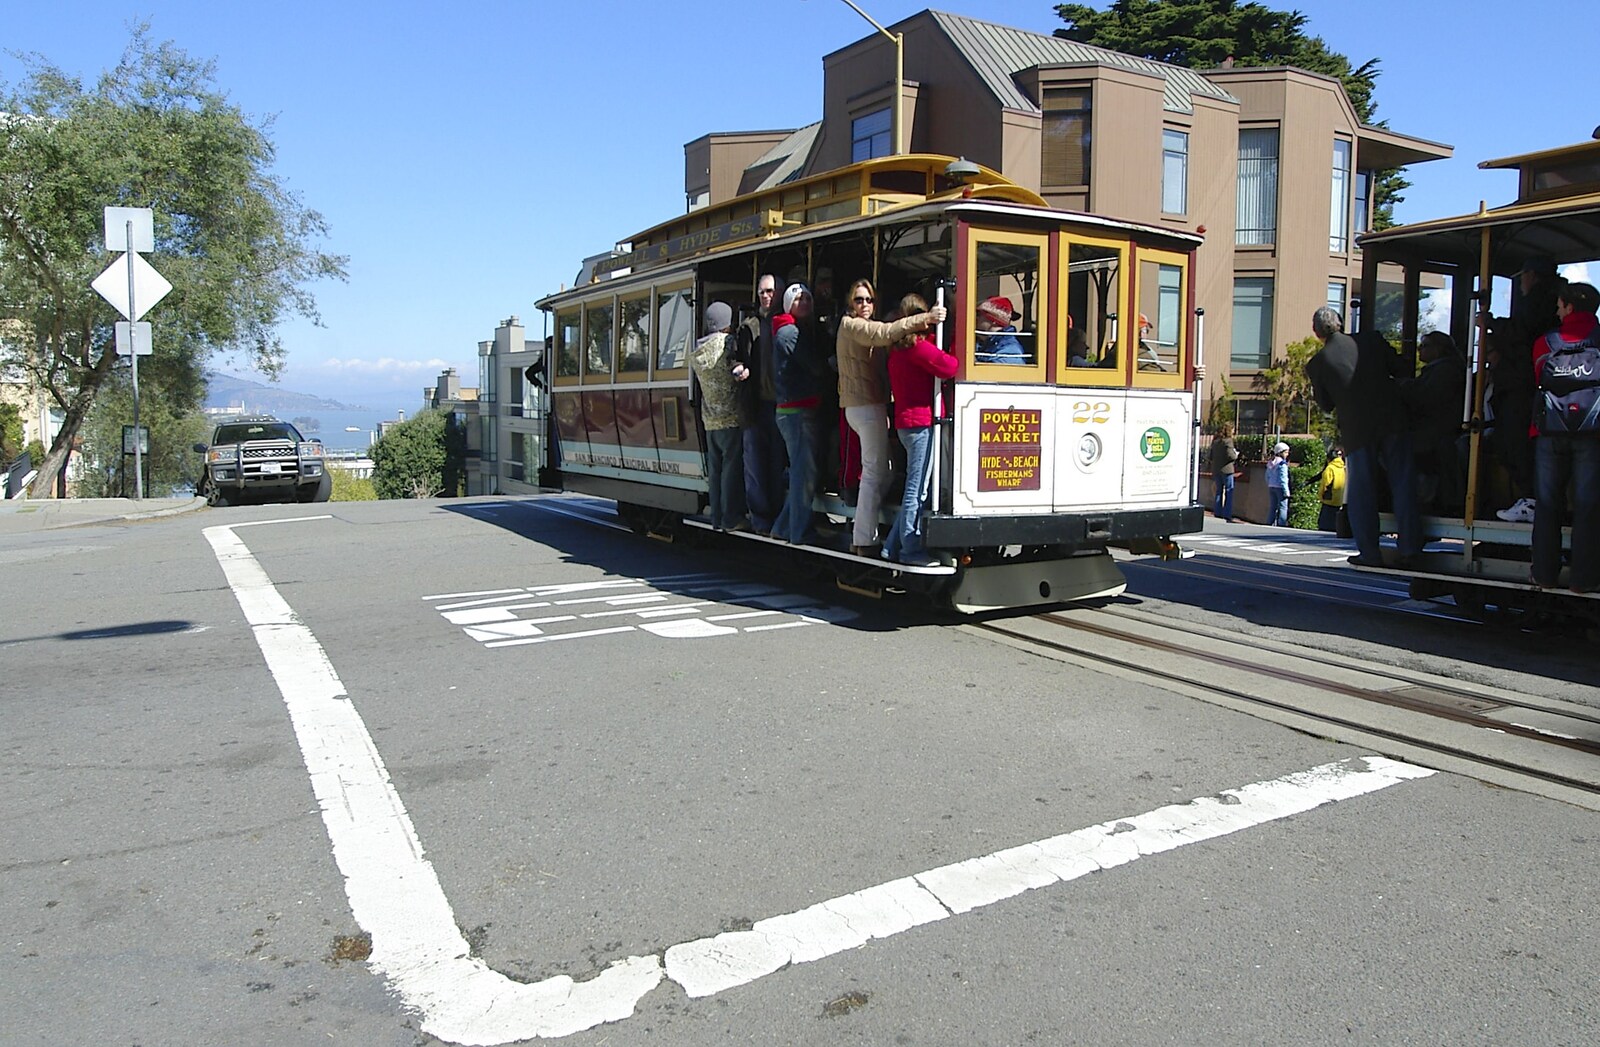 The Powell and Market tram from Chinatown, Telegraph Hill and Fisherman's Wharf, San Francisco, California, US - 11th March 2006